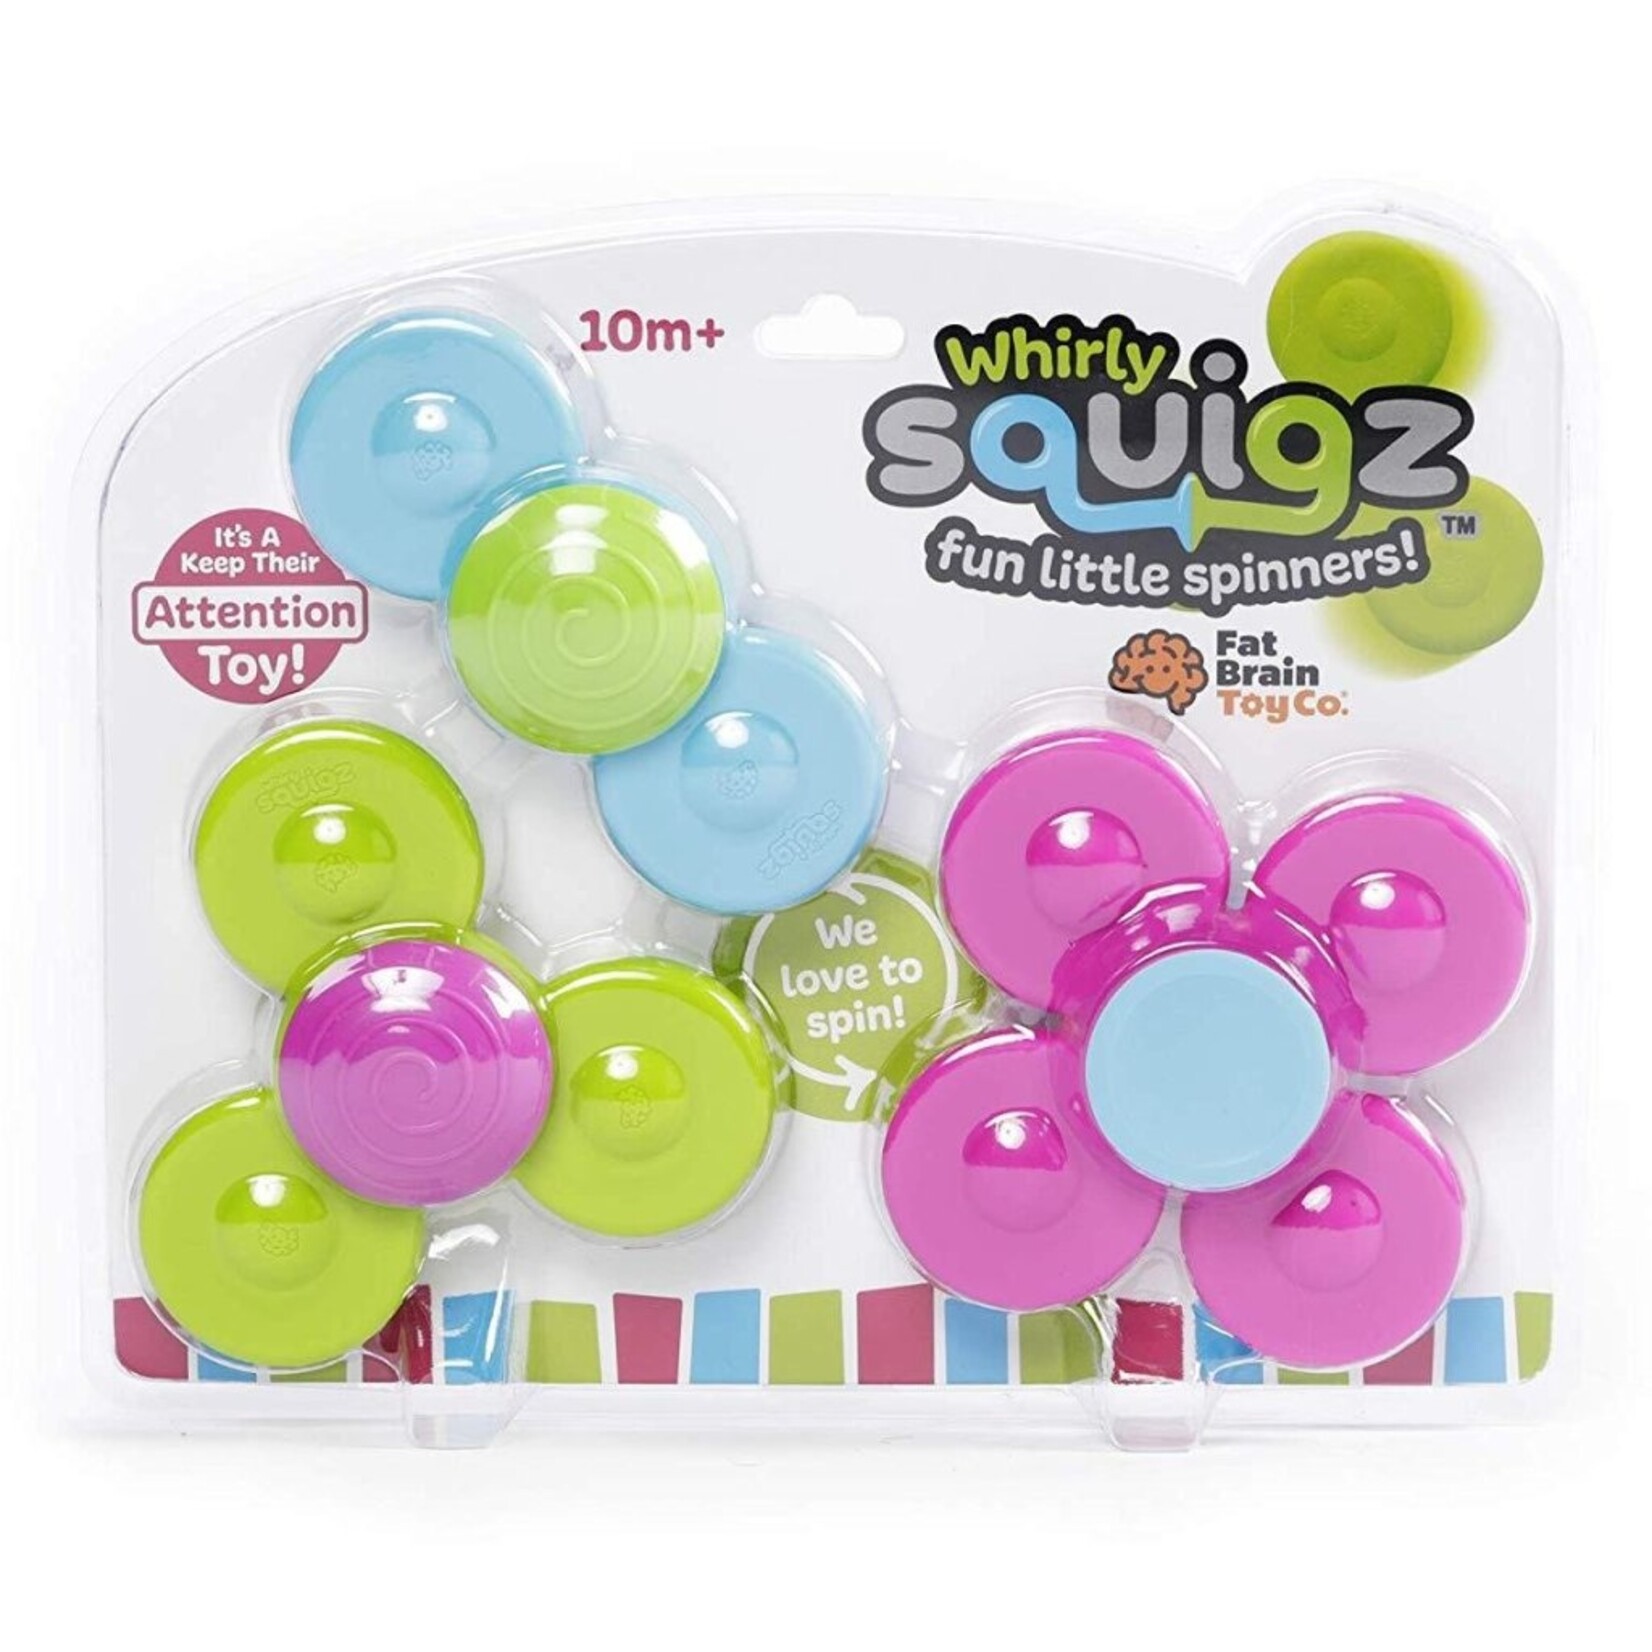 FAT BRAIN TOYS WHIRLY SQUIGZ